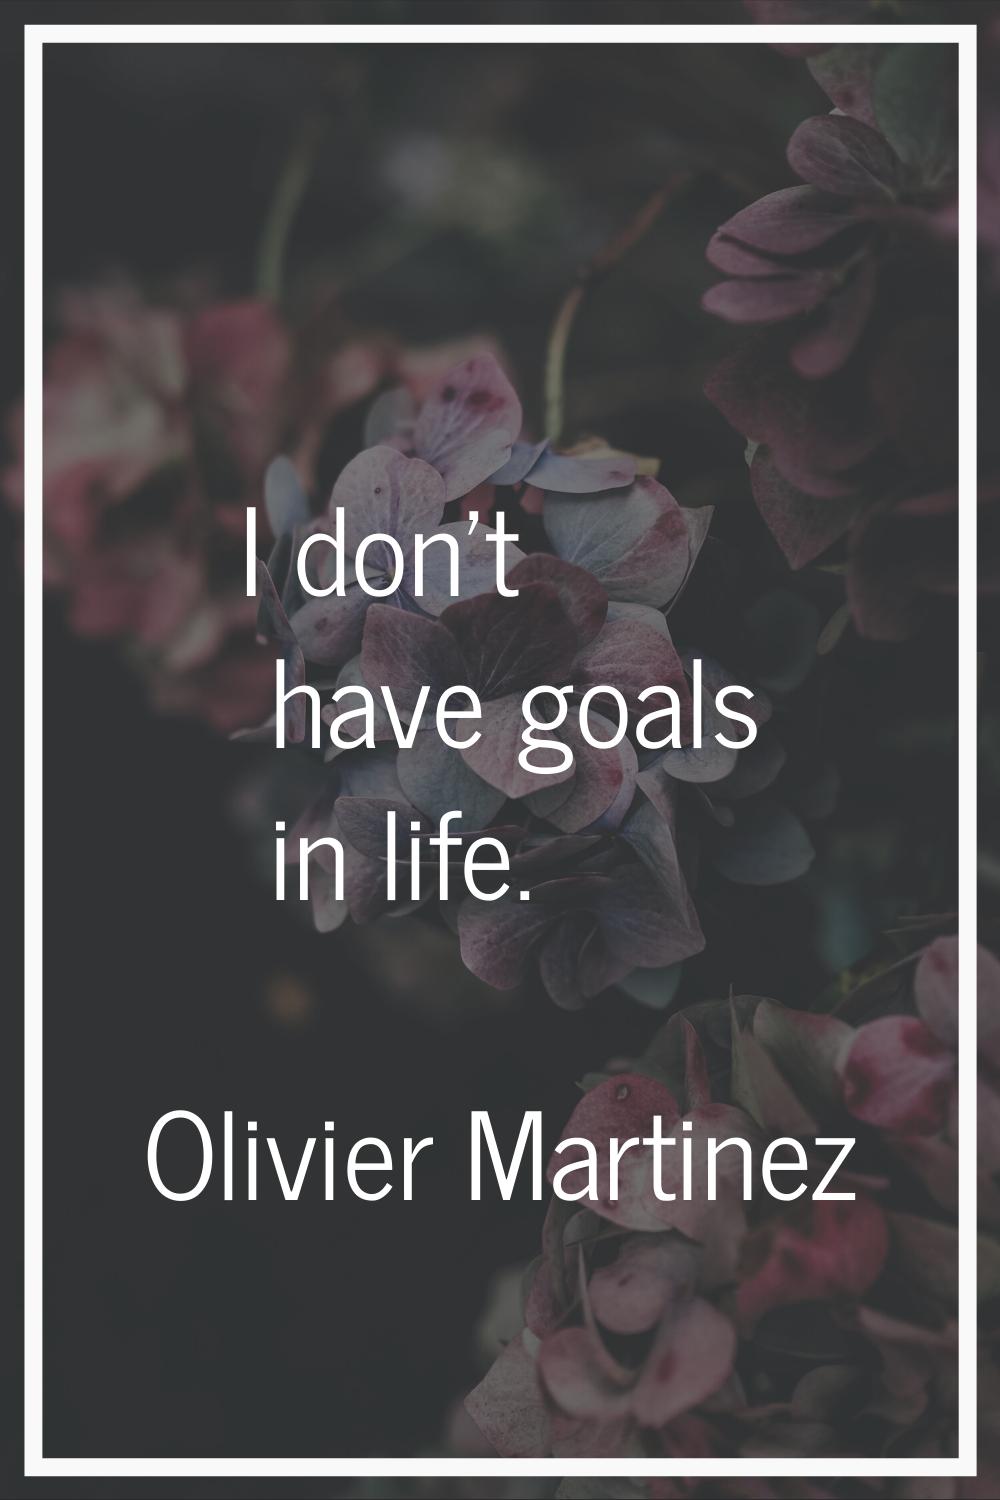 I don't have goals in life.